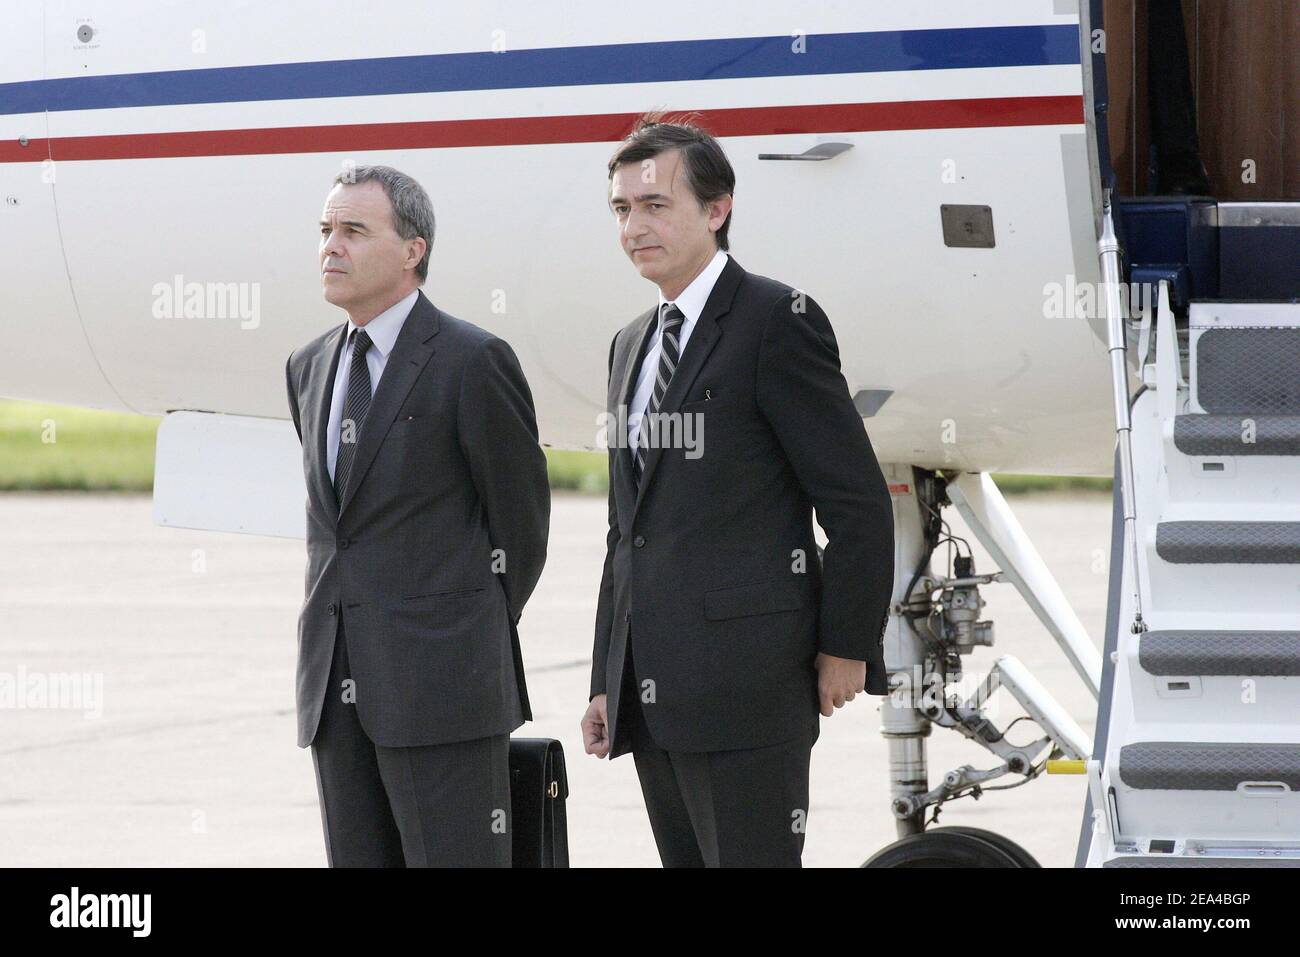 French Foreign Minister Philippe Douste-Blazy (R) and DGSE director Pierre Brochand at Villacoublay military airport, near Paris, France, on June 12, 2005, after French ex-hostage in Iraq, journalist Florence Aubenas, arrived at Villacoublay military airport, near Paris, France, on Sunday, June 12, 2005. Photo by Gorassini-Mousse-Nebinger/ABACA. Stock Photo